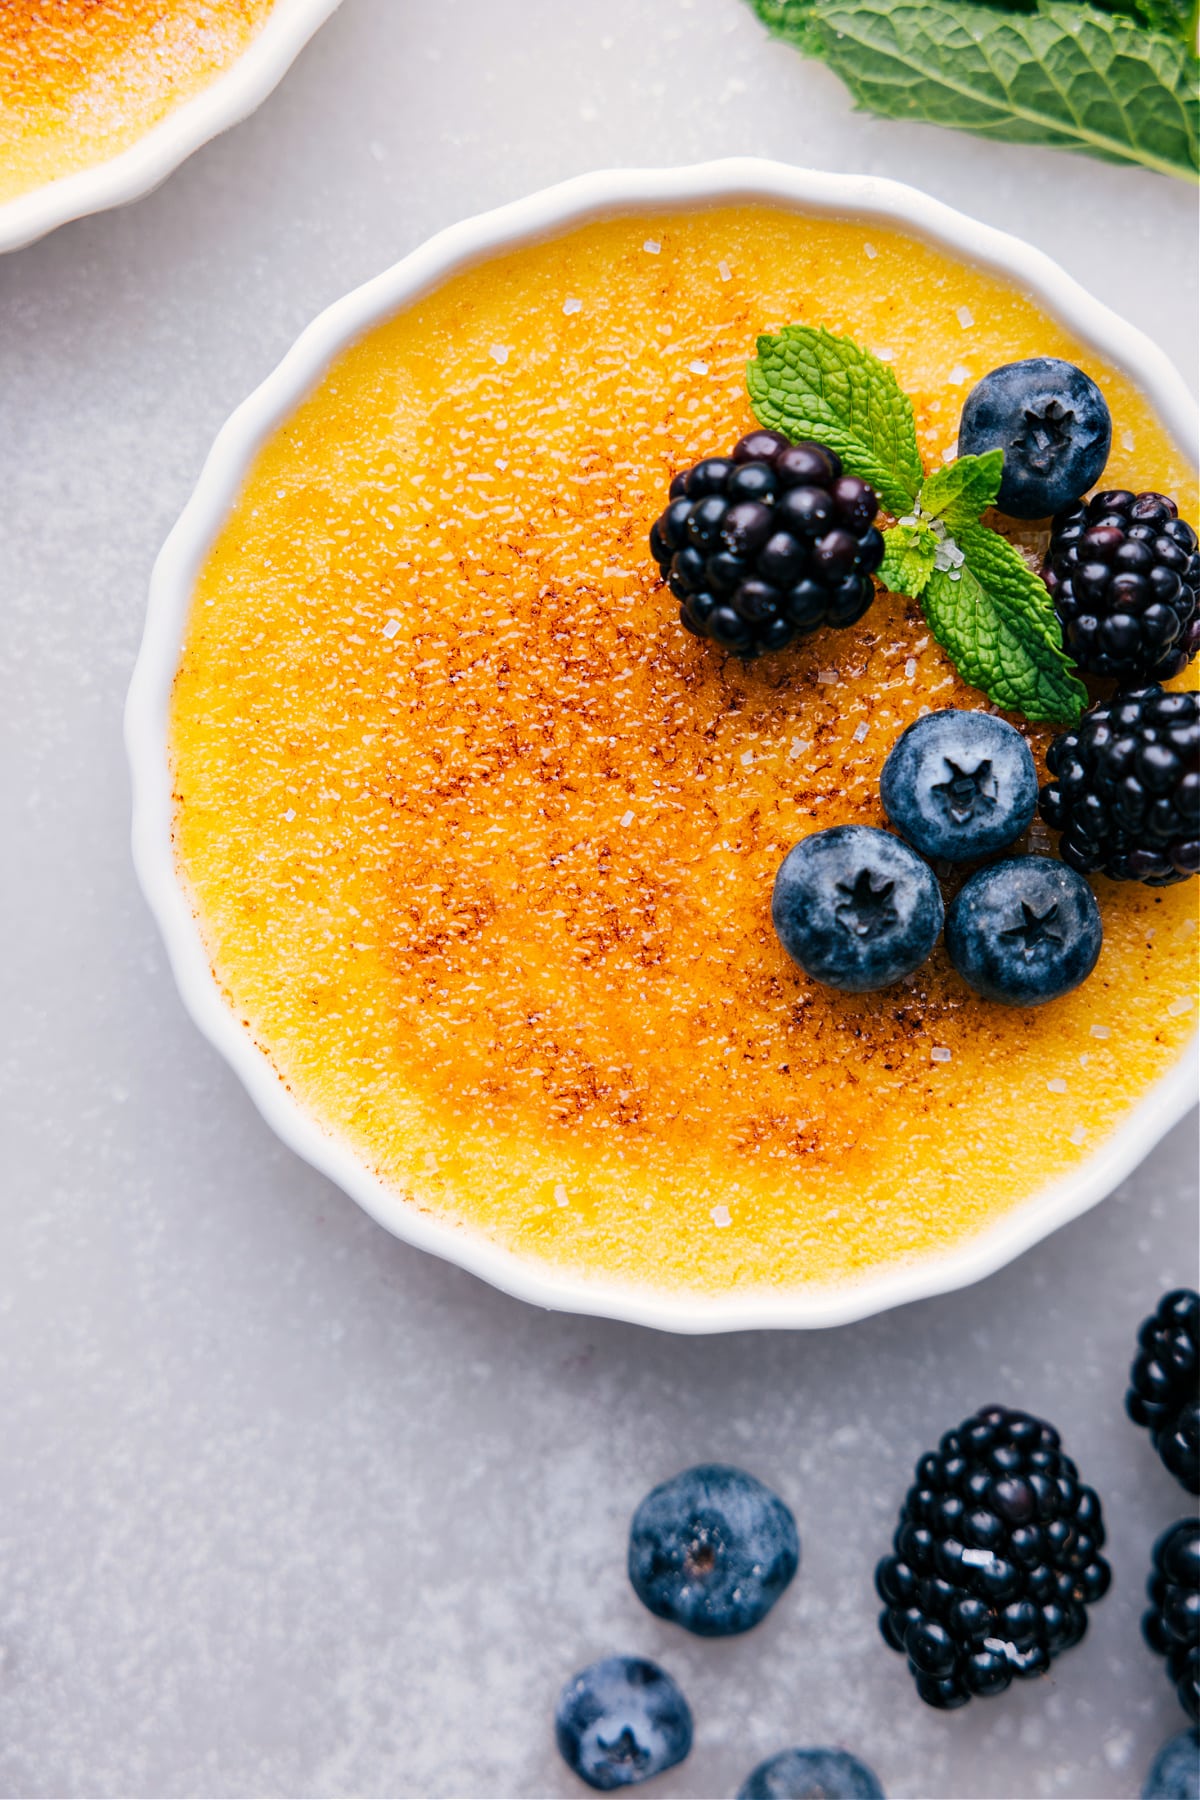 Delicious easy creme brûlée with a caramelized top, garnished with fresh fruit.